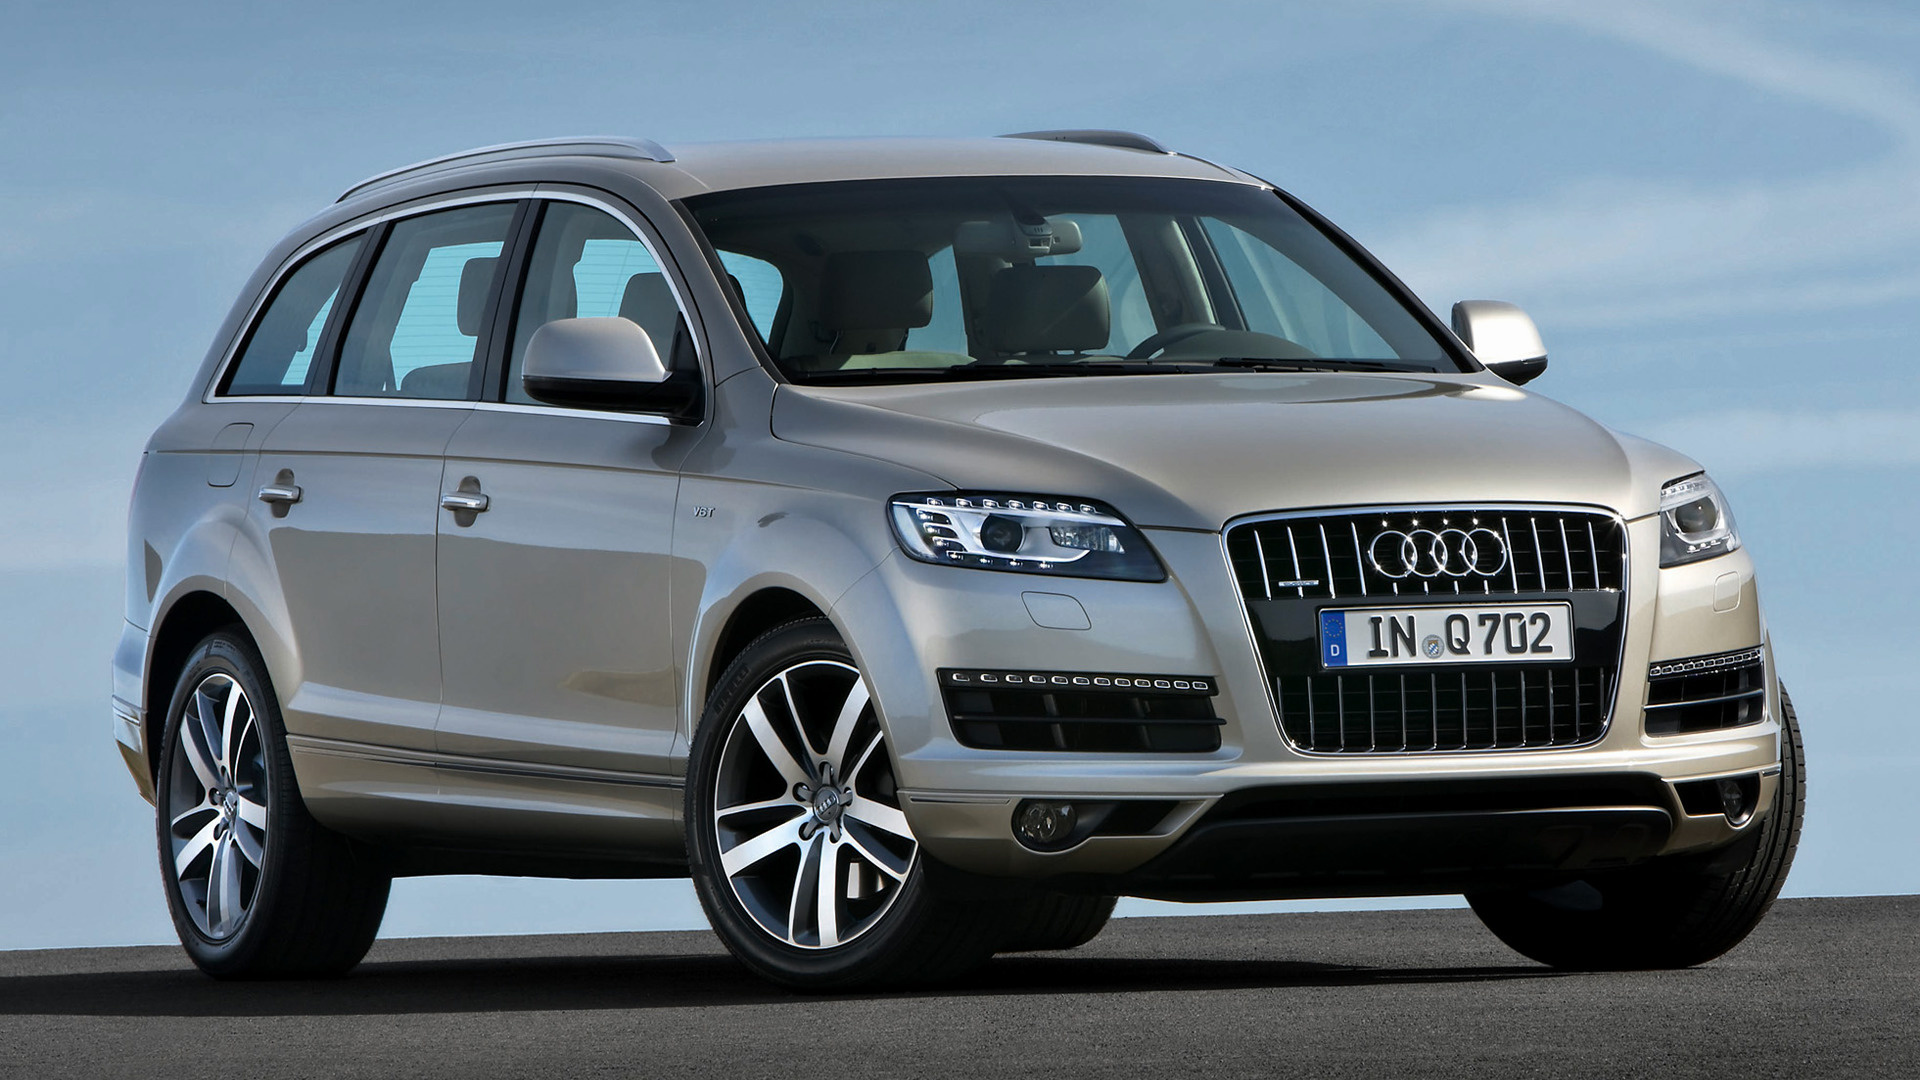 2009 Audi Q7 - Wallpapers and HD Images | Car Pixel